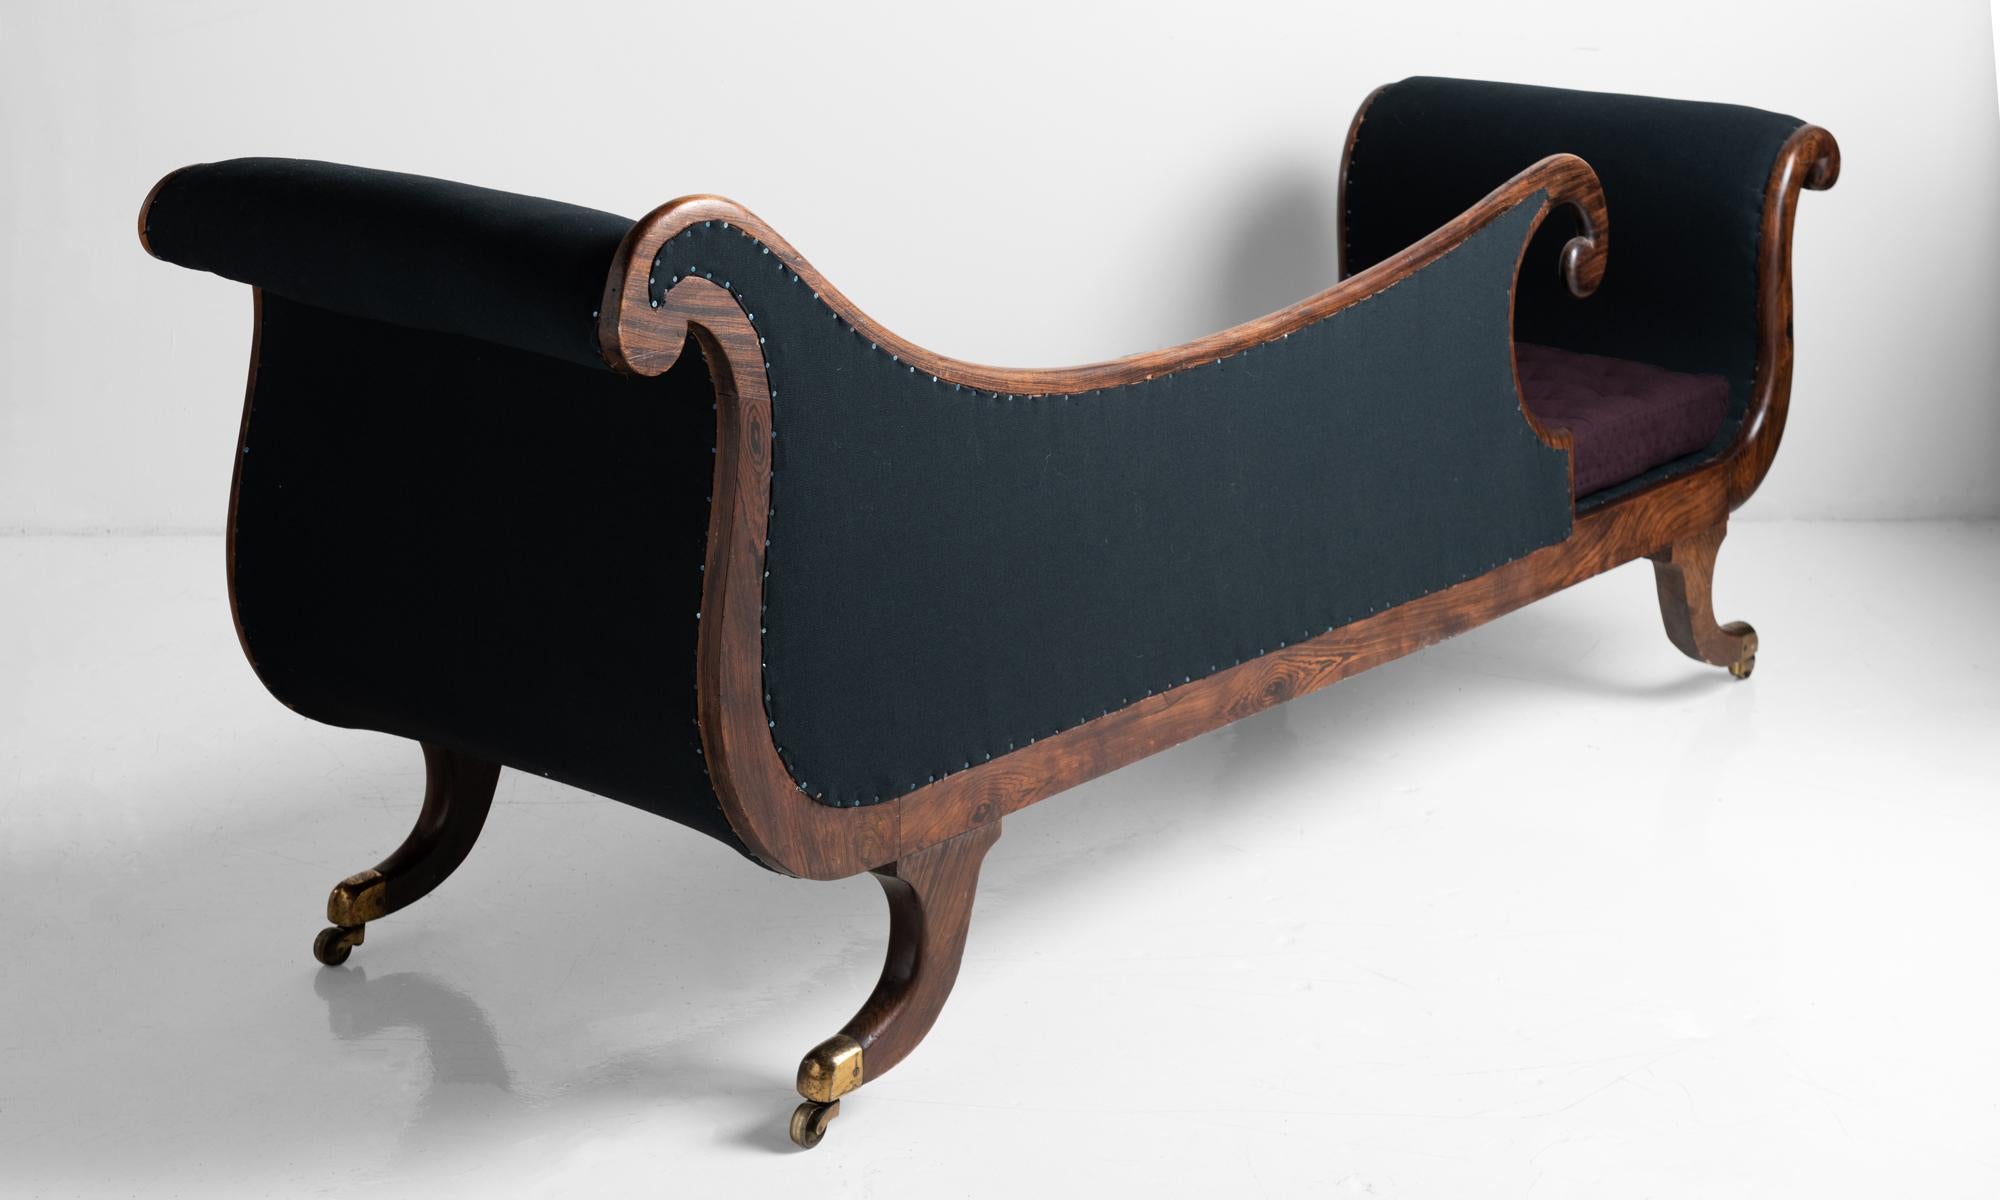 Beautifully carved chaise with brass inlay and original brass castors. Newly upholstered in Maharam fabric. 



Measures: 84